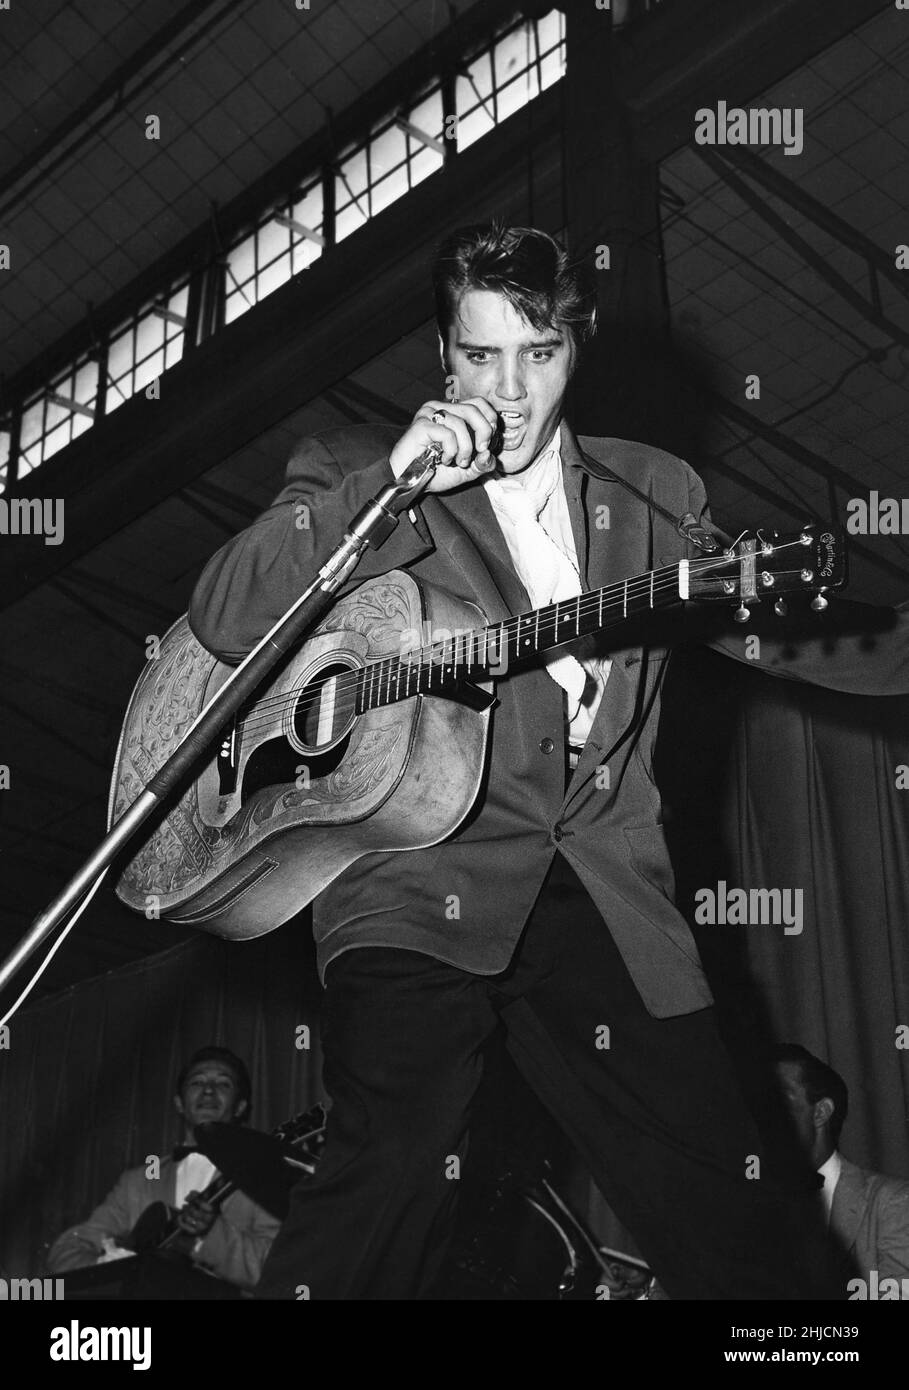 Elvis Presley (January 8, 1935 ‚Äì August 16, 1977) performing in Tampa, Florida, 1956. Stock Photo